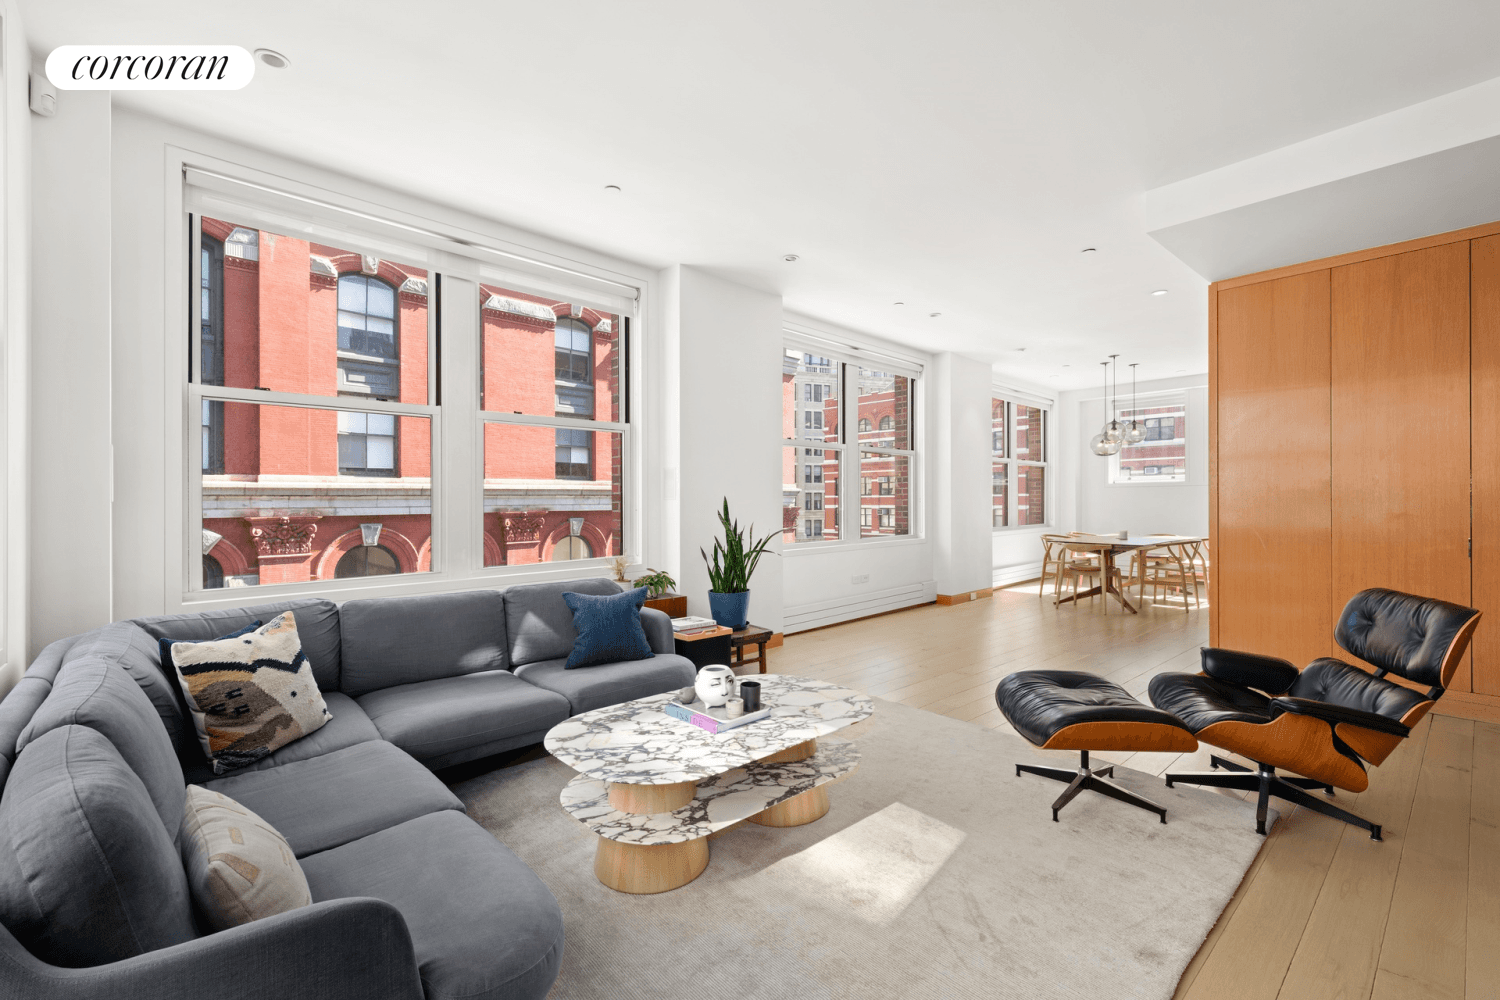 Bask in unprecedented natural light in this full floor three bedroom, two bathroom luxury loft featuring contemporary styling, exceptional storage and an ideal location in the heart of Tribeca.